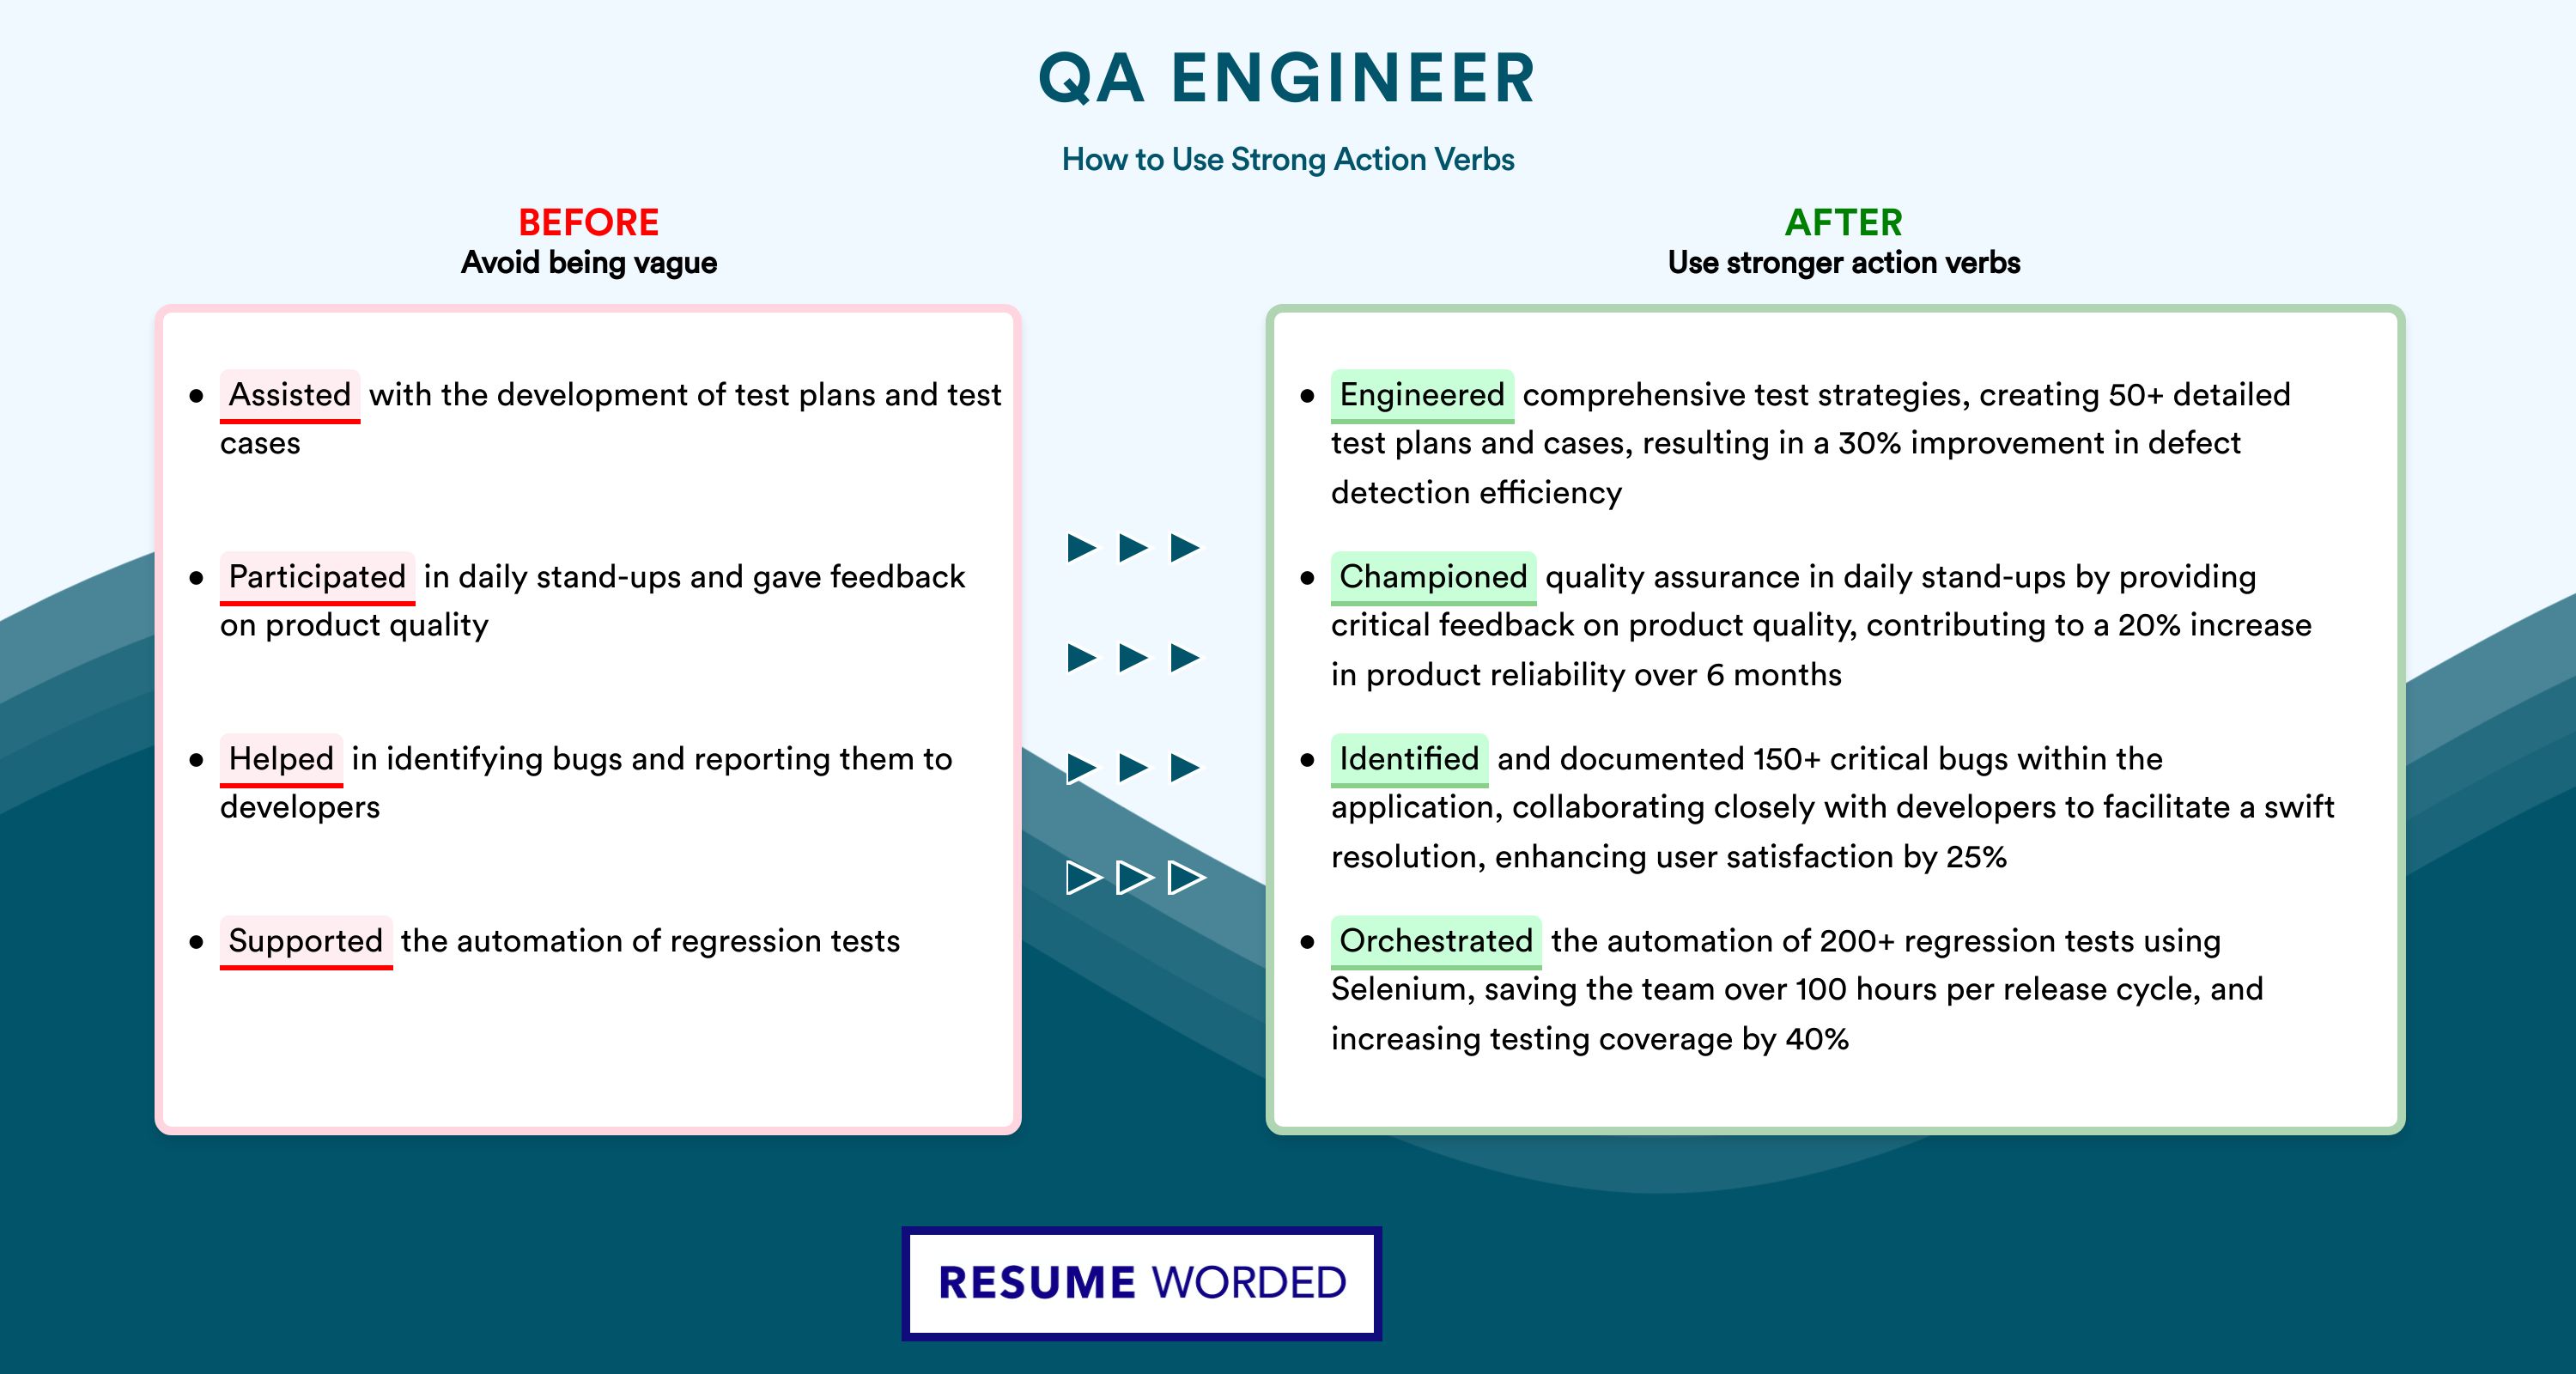 Action Verbs for QA (Quality Assurance) Engineer